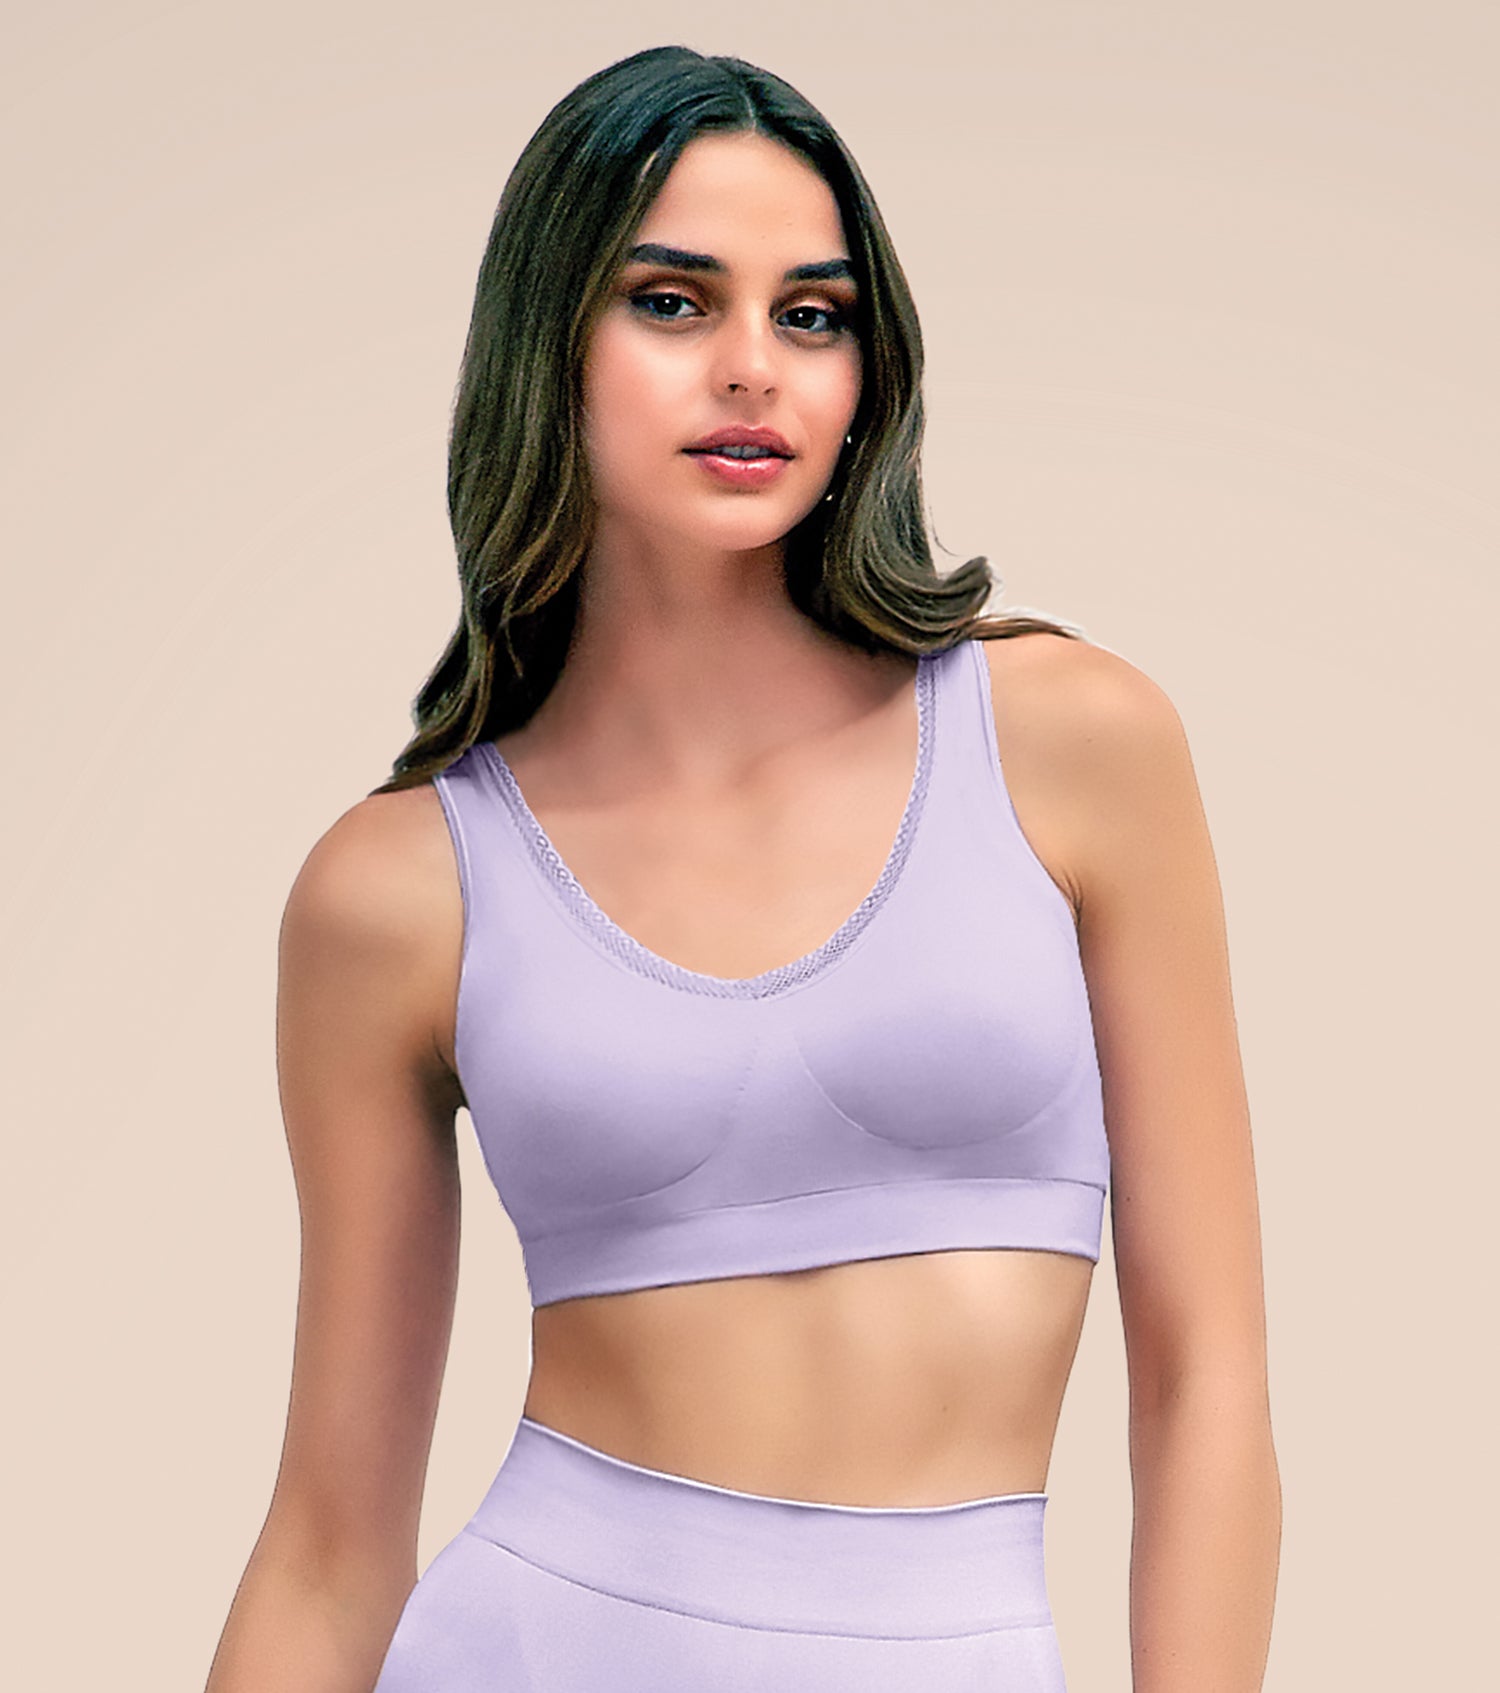 Enamor Flexi Free F137 Plunge Comfort Bralette Bra for Women - Non Padded, Wirefree and High Coverage